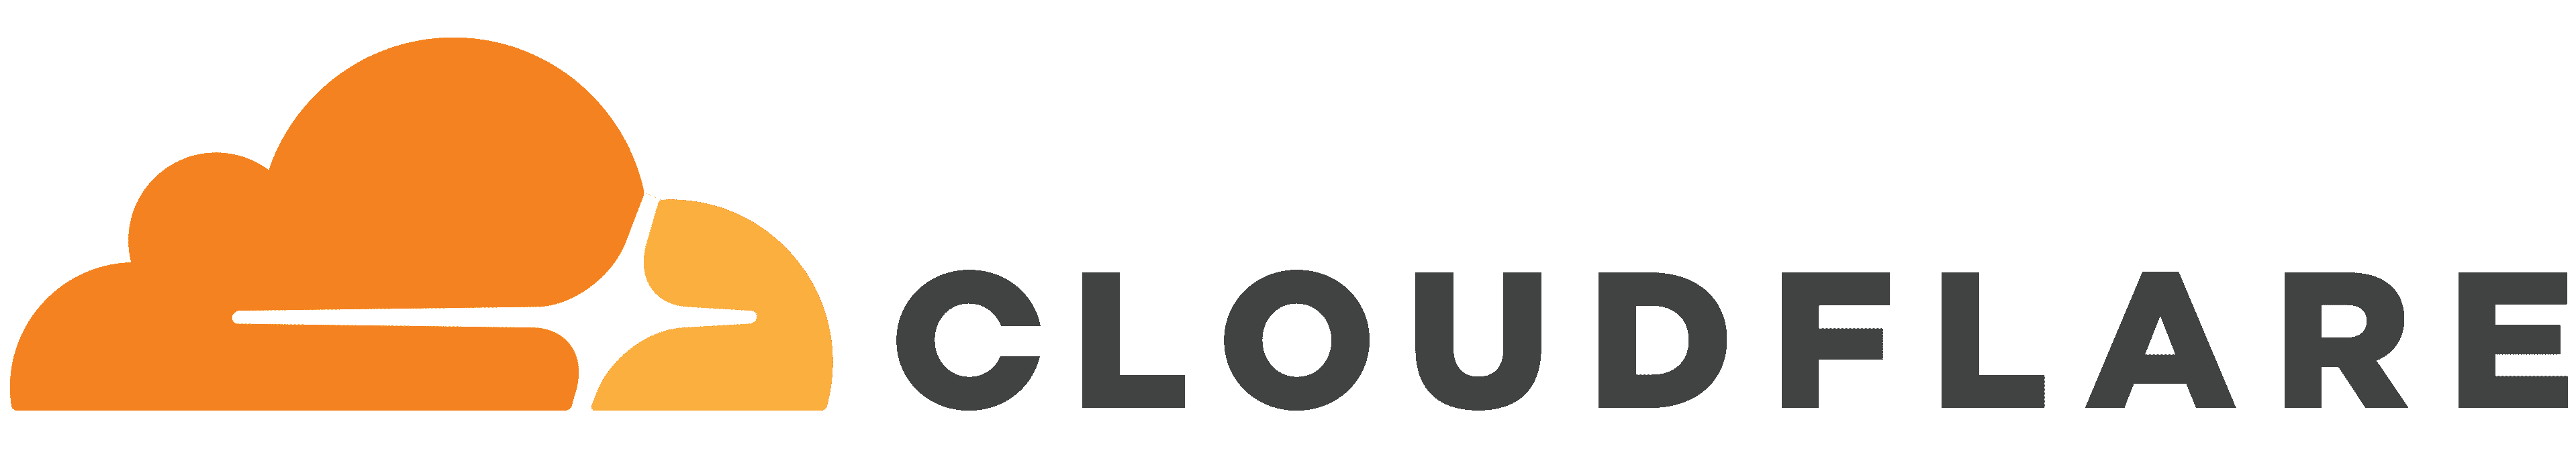 Cloudflare has upgraded their network connectivity to 100G logo